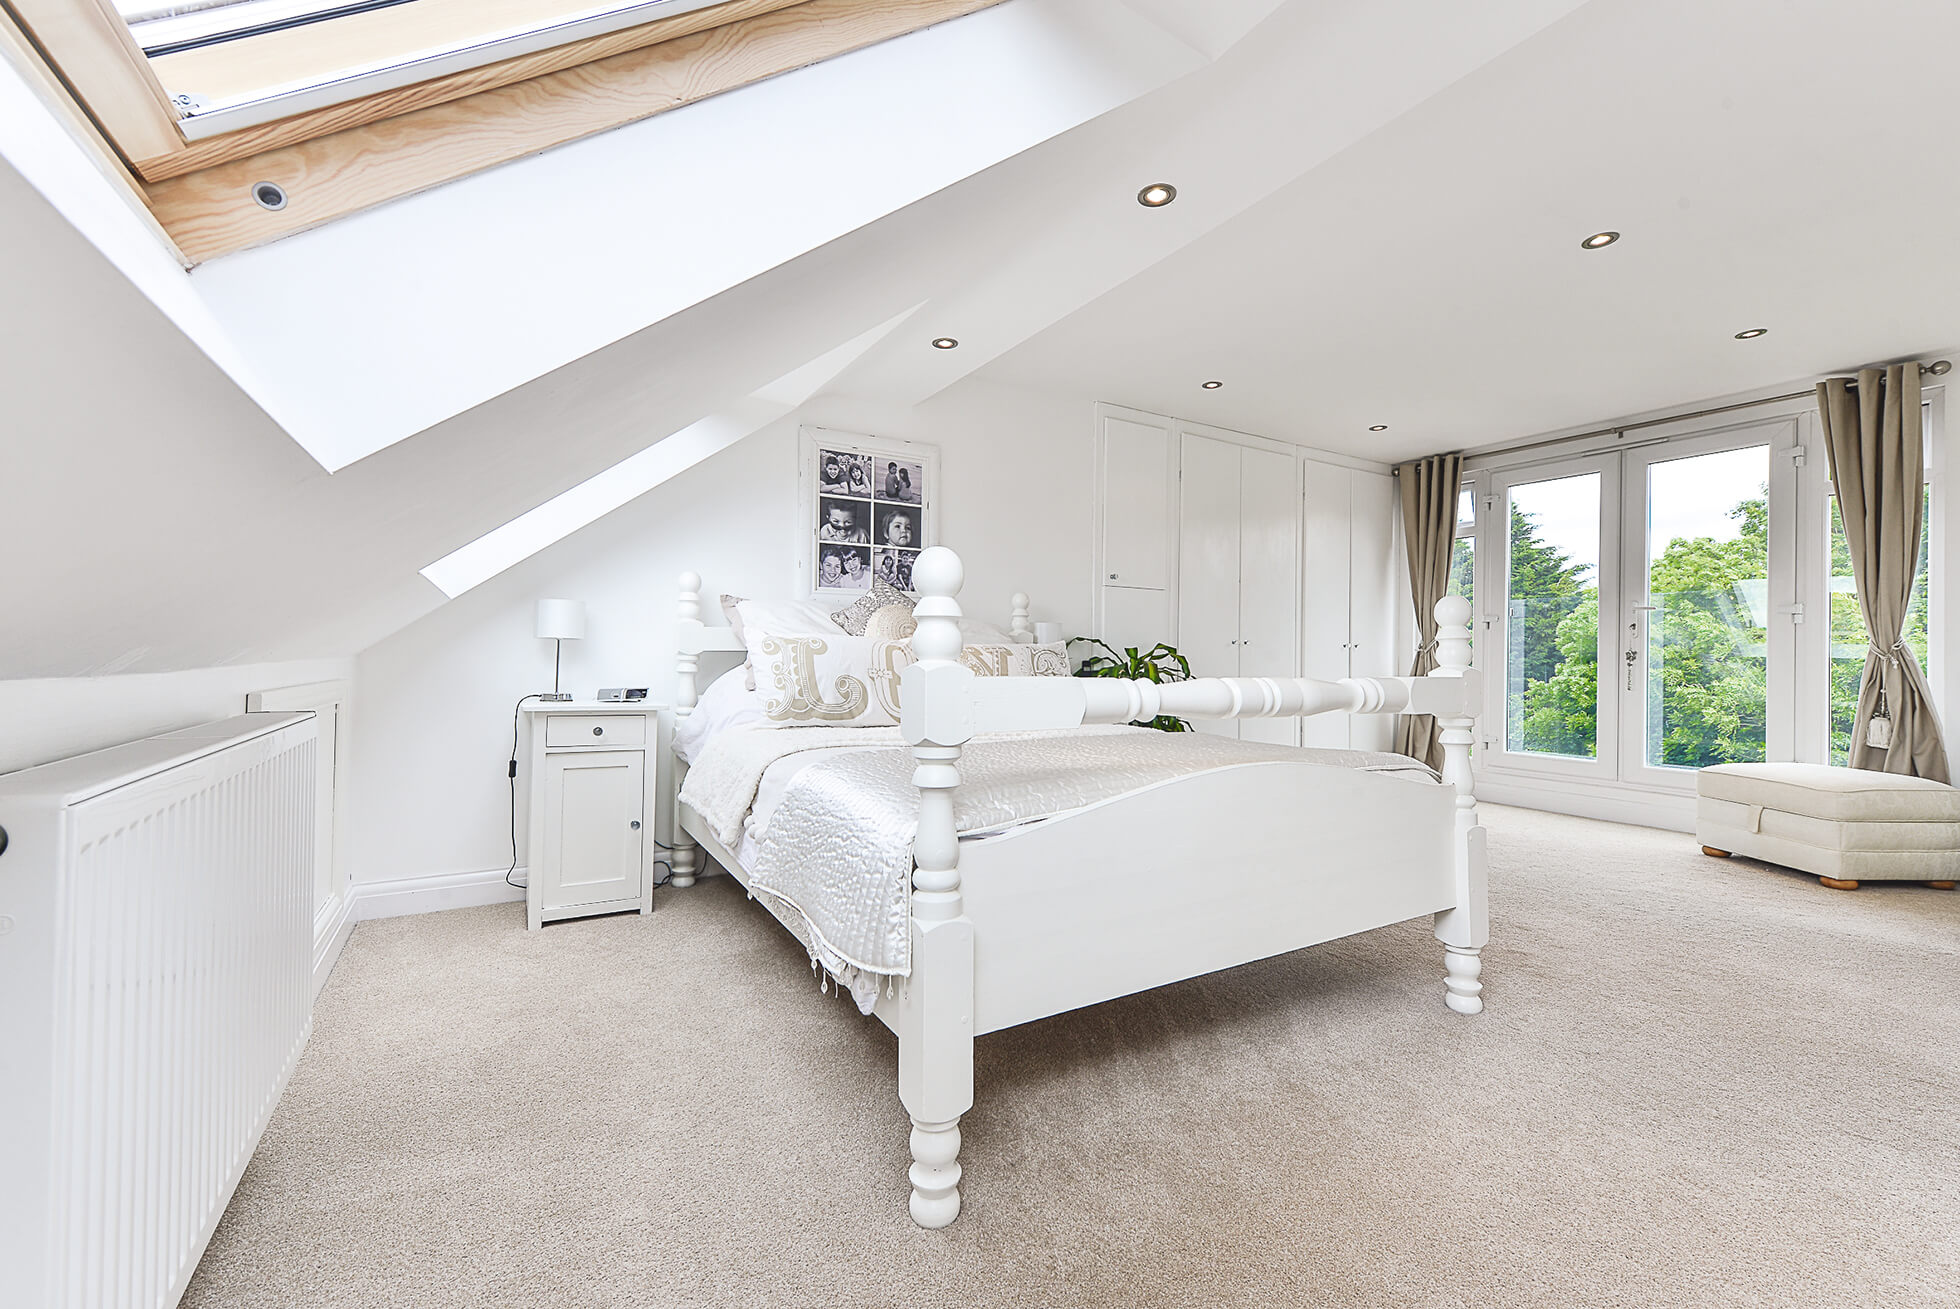 Do you have a question about converting your Loft in Sawbridgeworth? Here are the most popular questions asked by our clients.